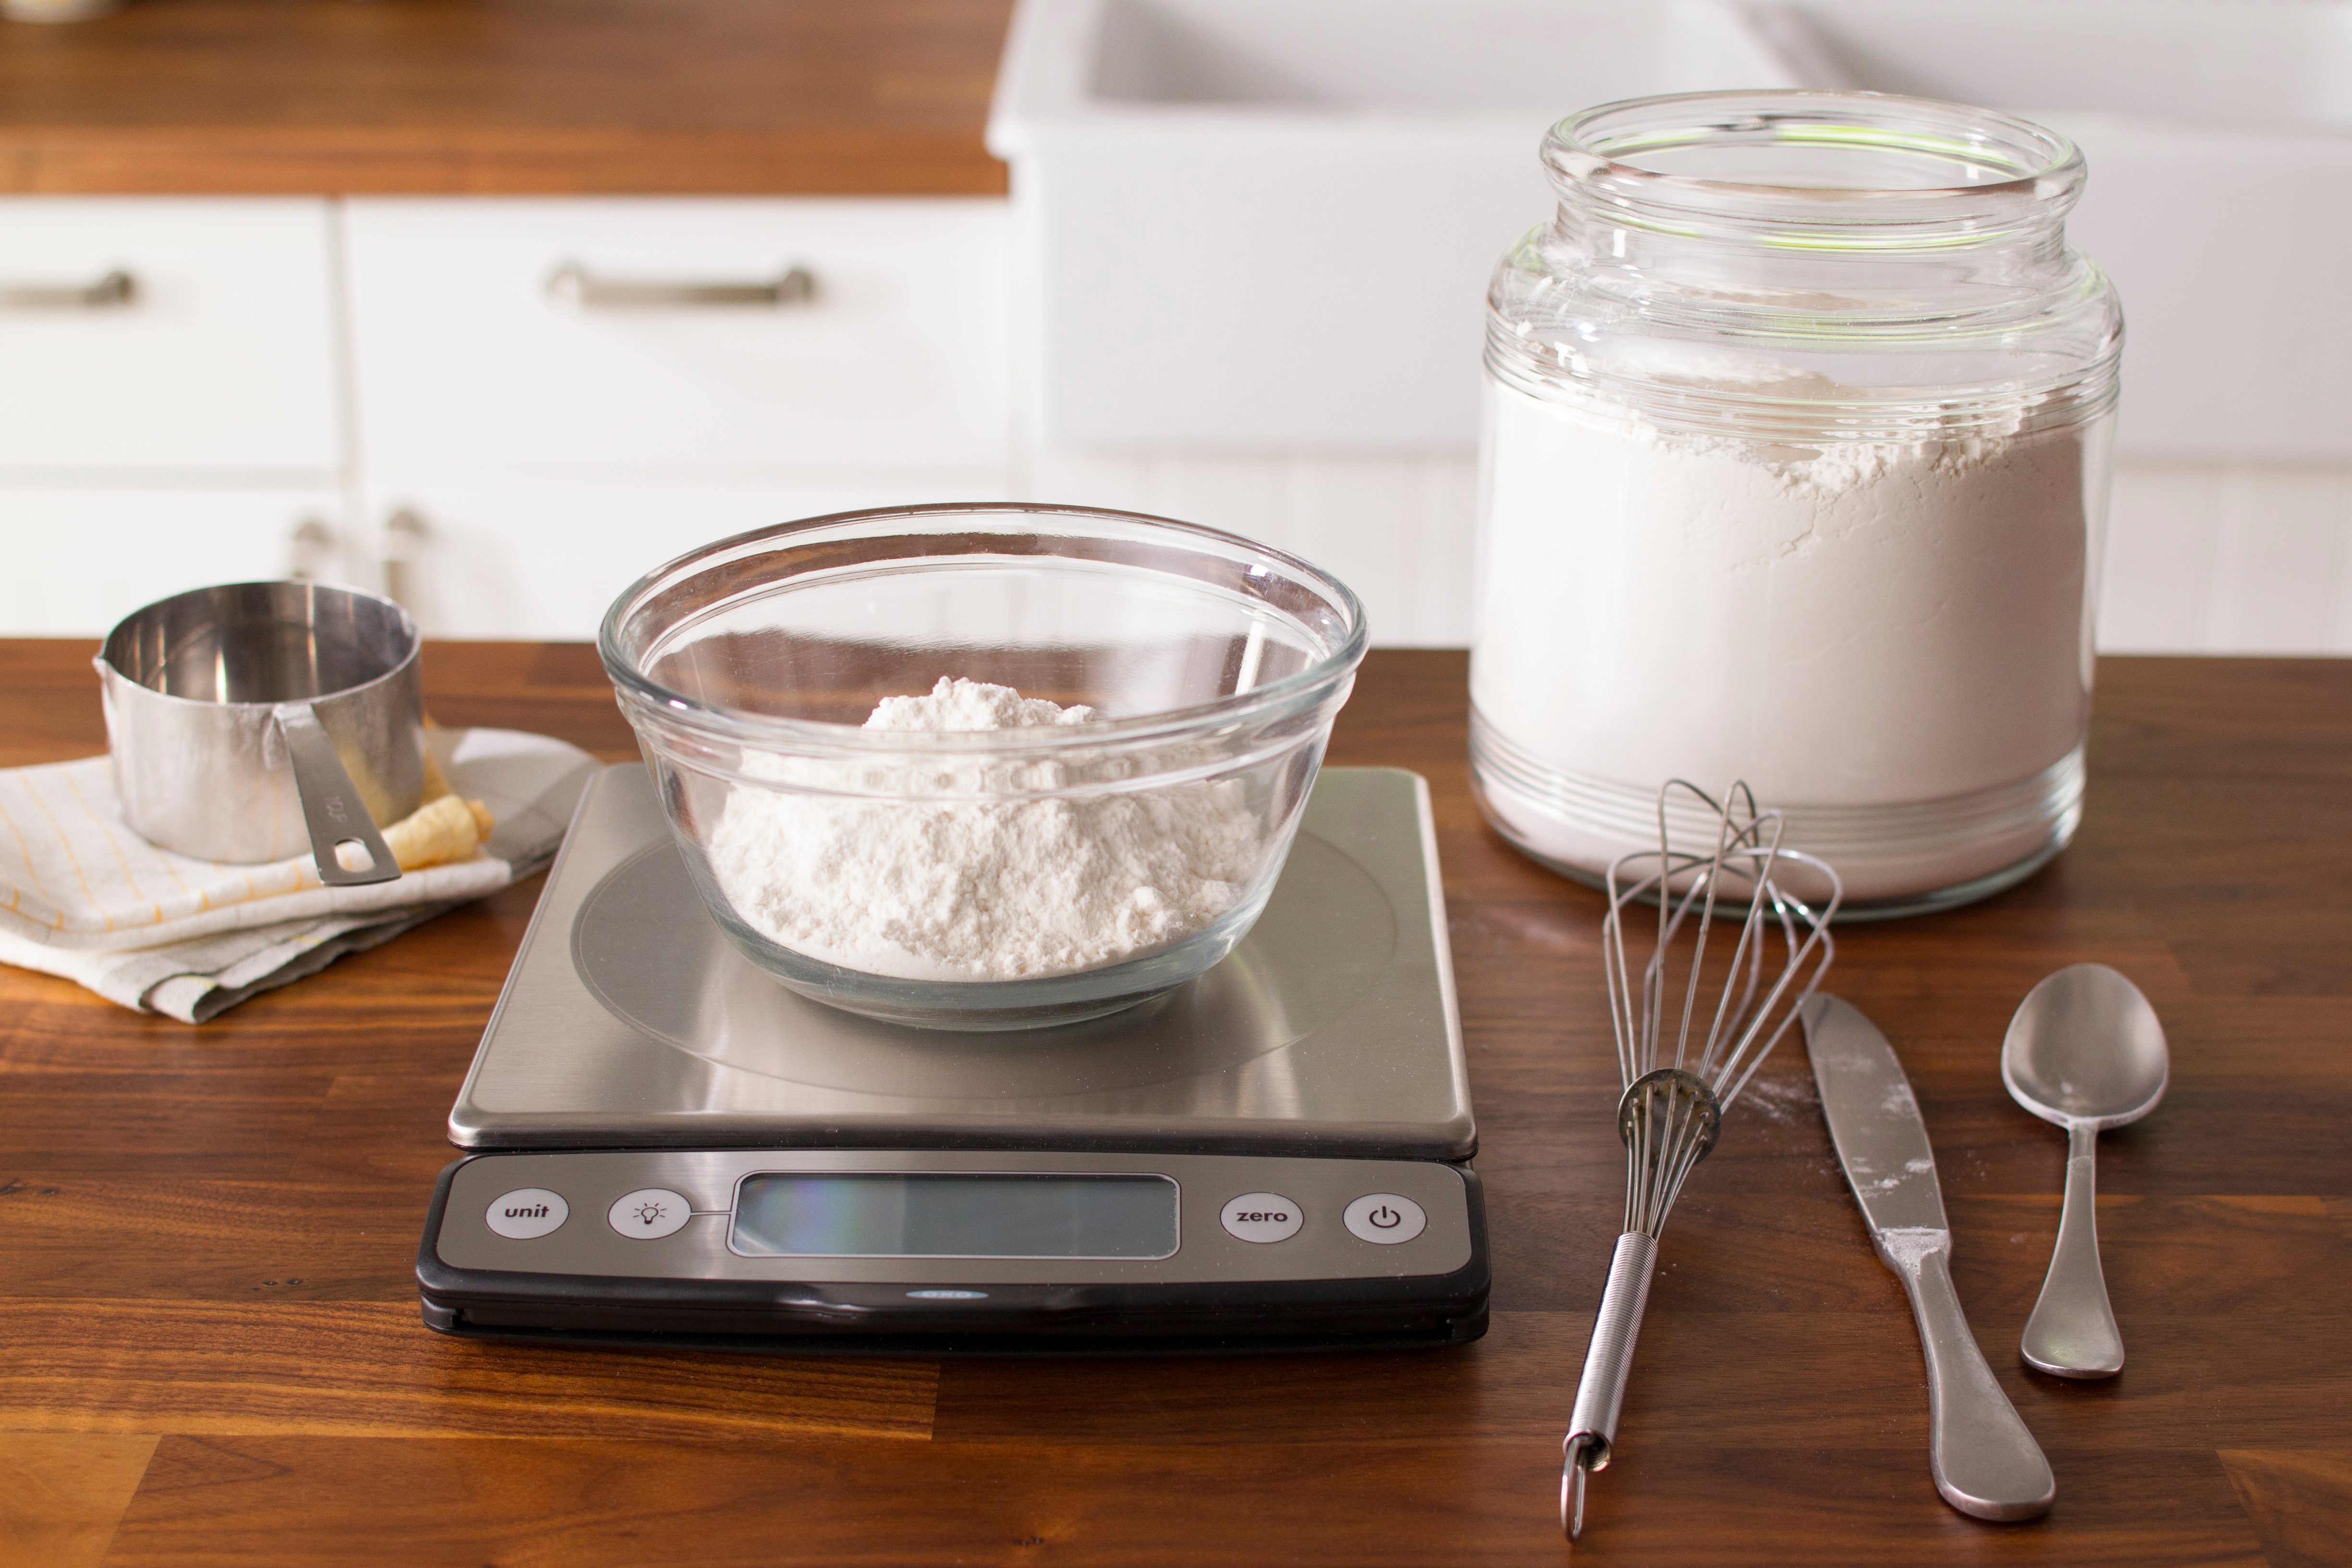 How to Measure without Measuring Cups